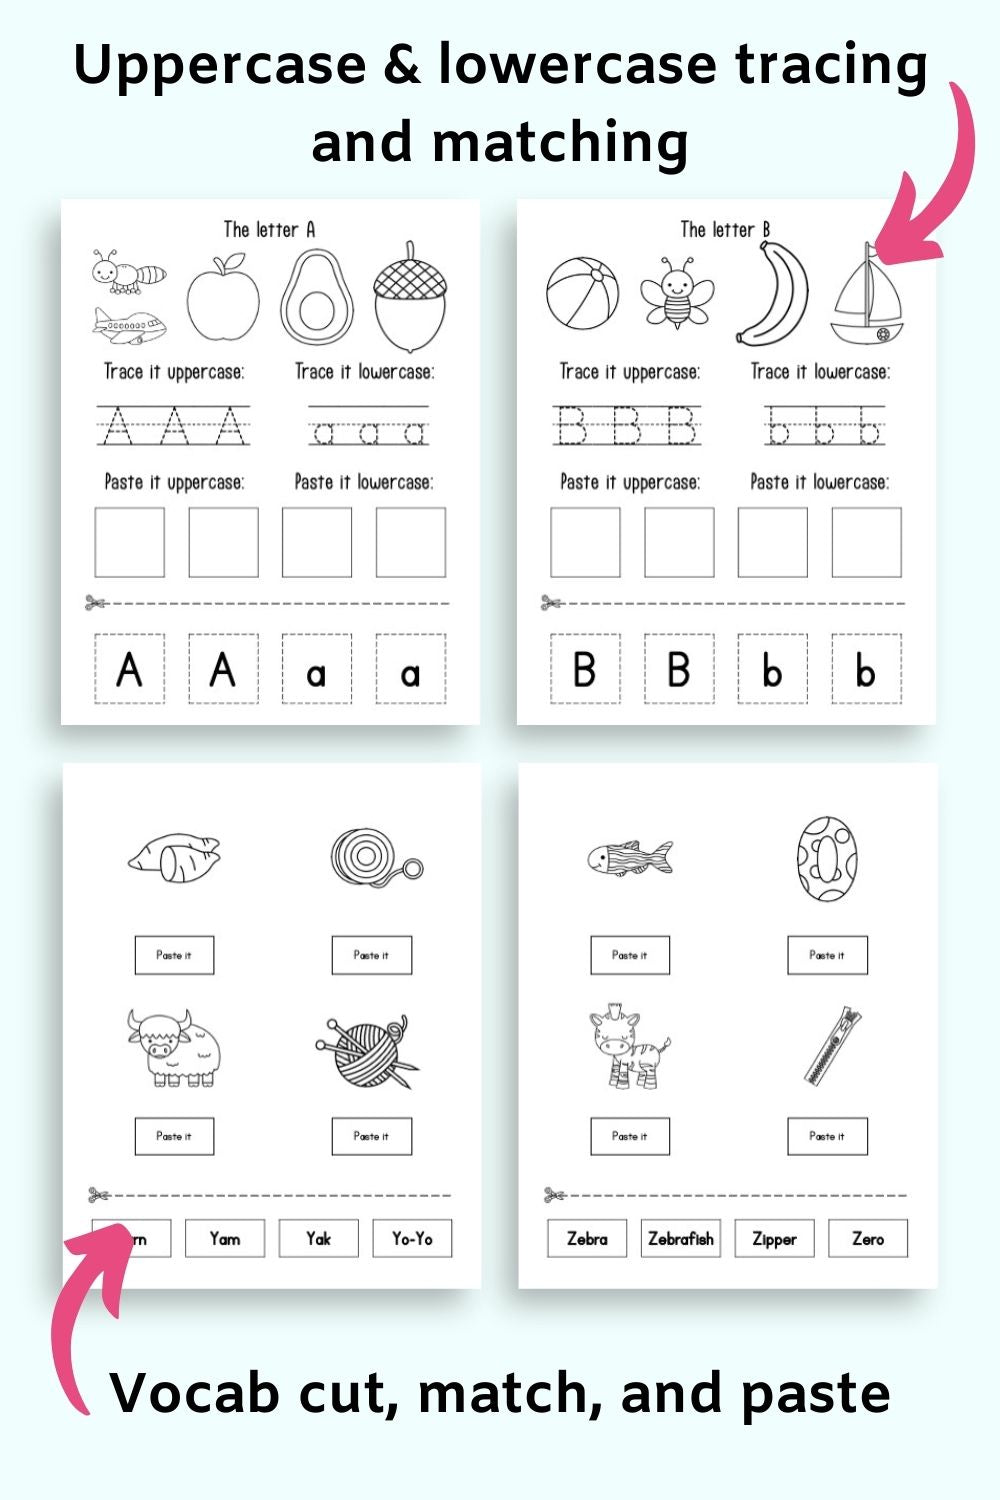 Text "uppercase and lowercase  tracing and matching" and "vocab cut, match, and paste" with previews of four alphabet activity pages